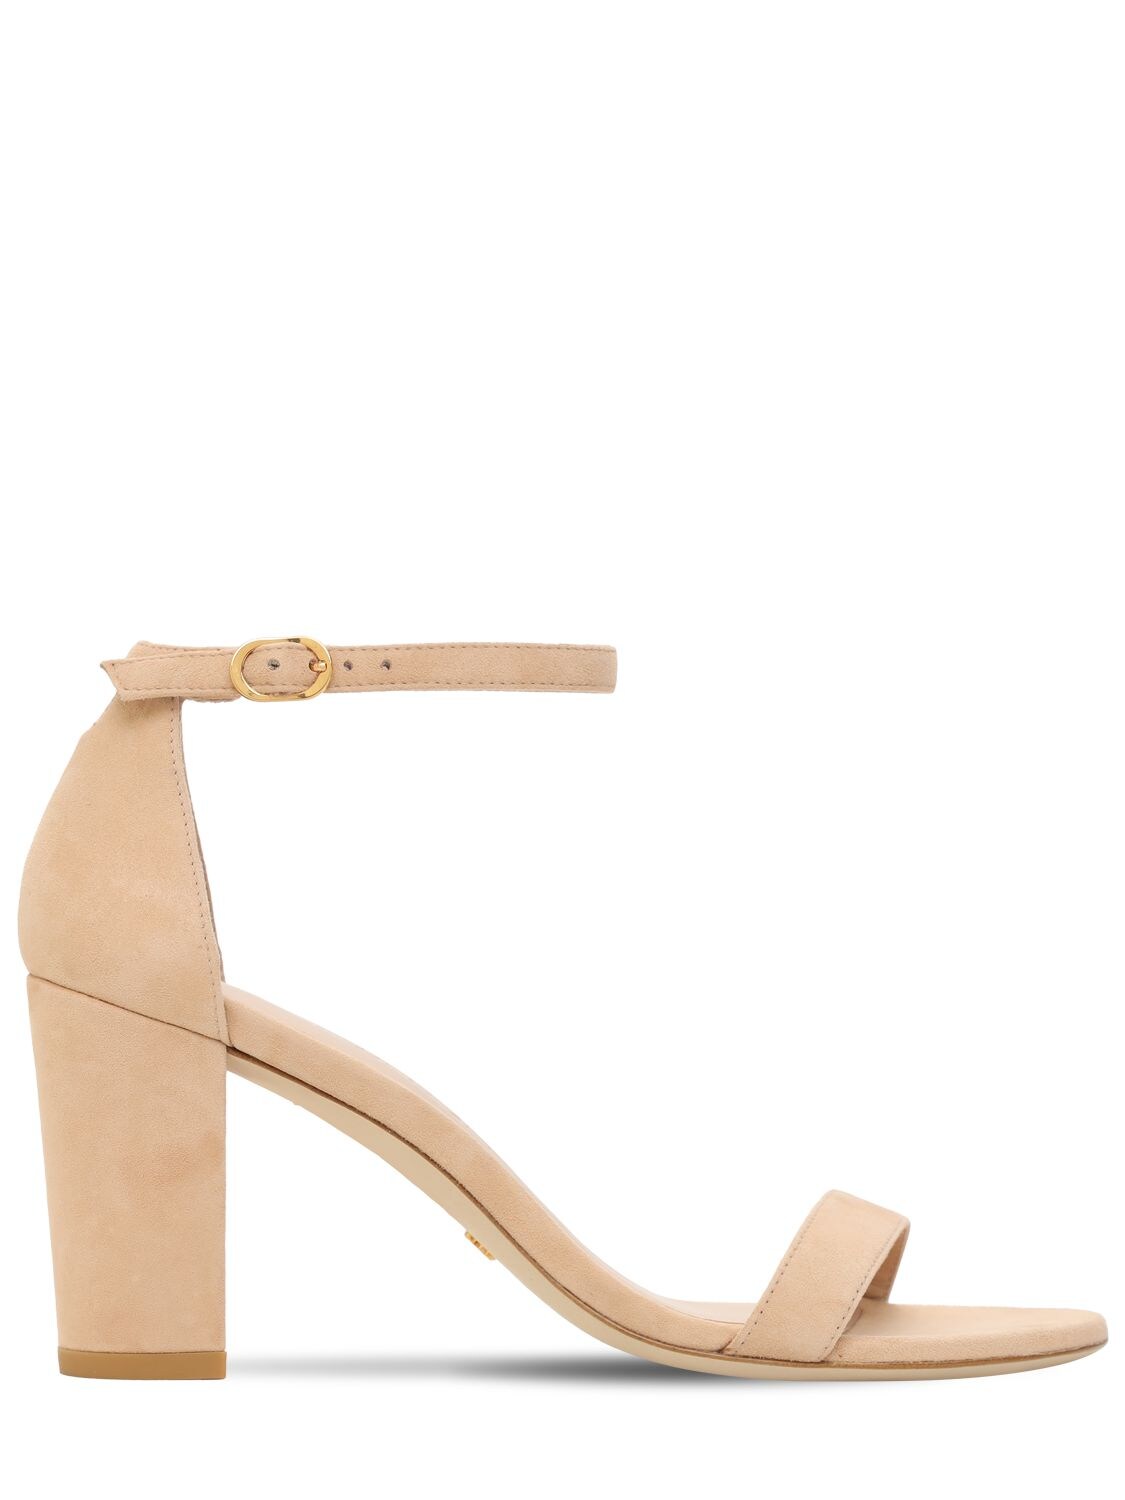 STUART WEITZMAN 80MM NEARLYNUDE SUEDE SANDALS,73IAHW014-QUPN0